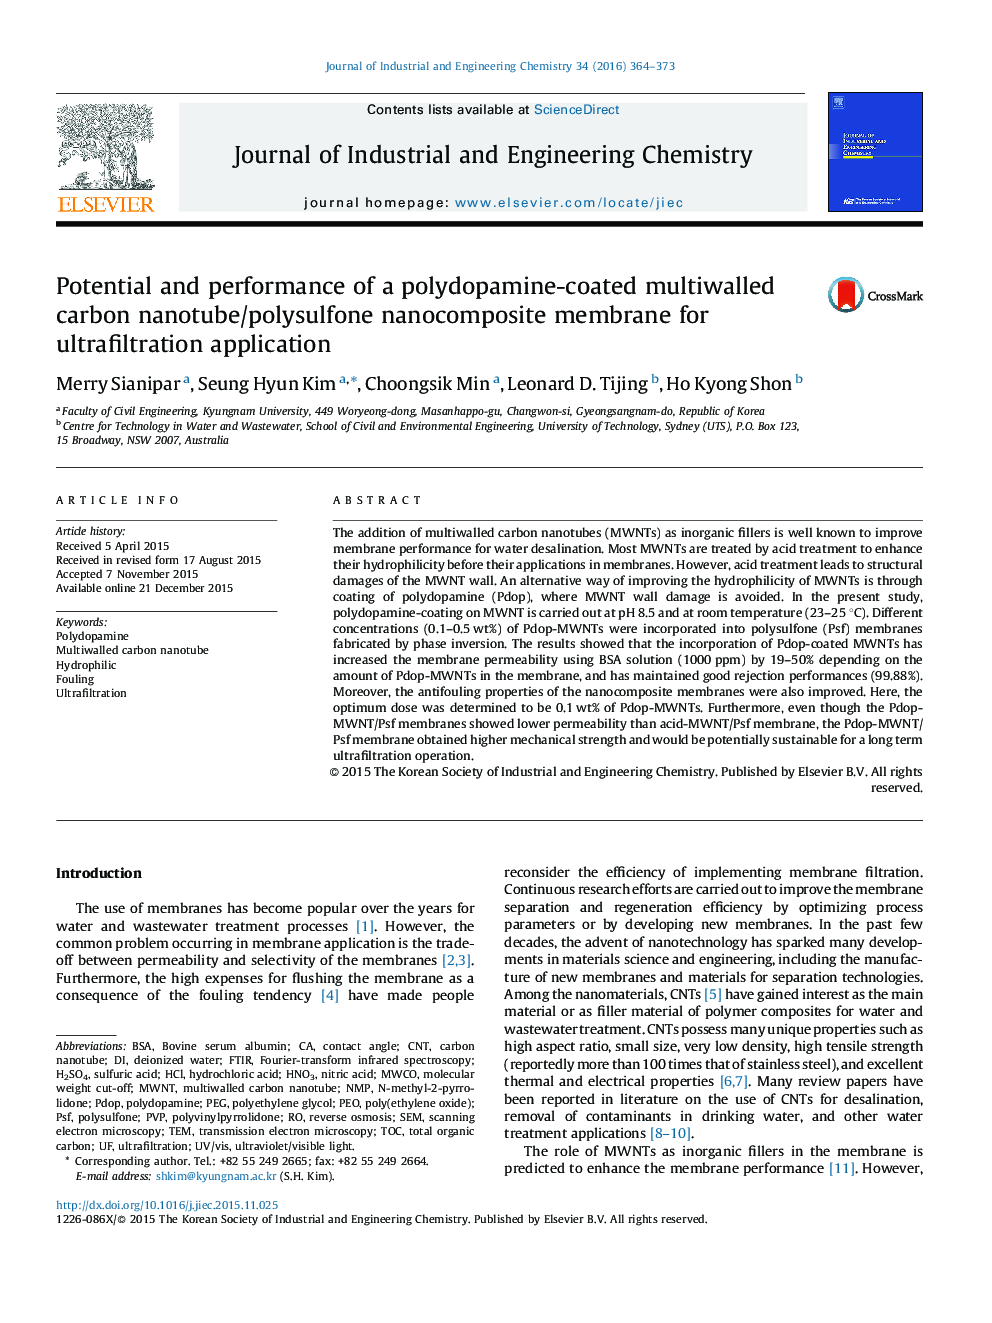 Potential and performance of a polydopamine-coated multiwalled carbon nanotube/polysulfone nanocomposite membrane for ultrafiltration application